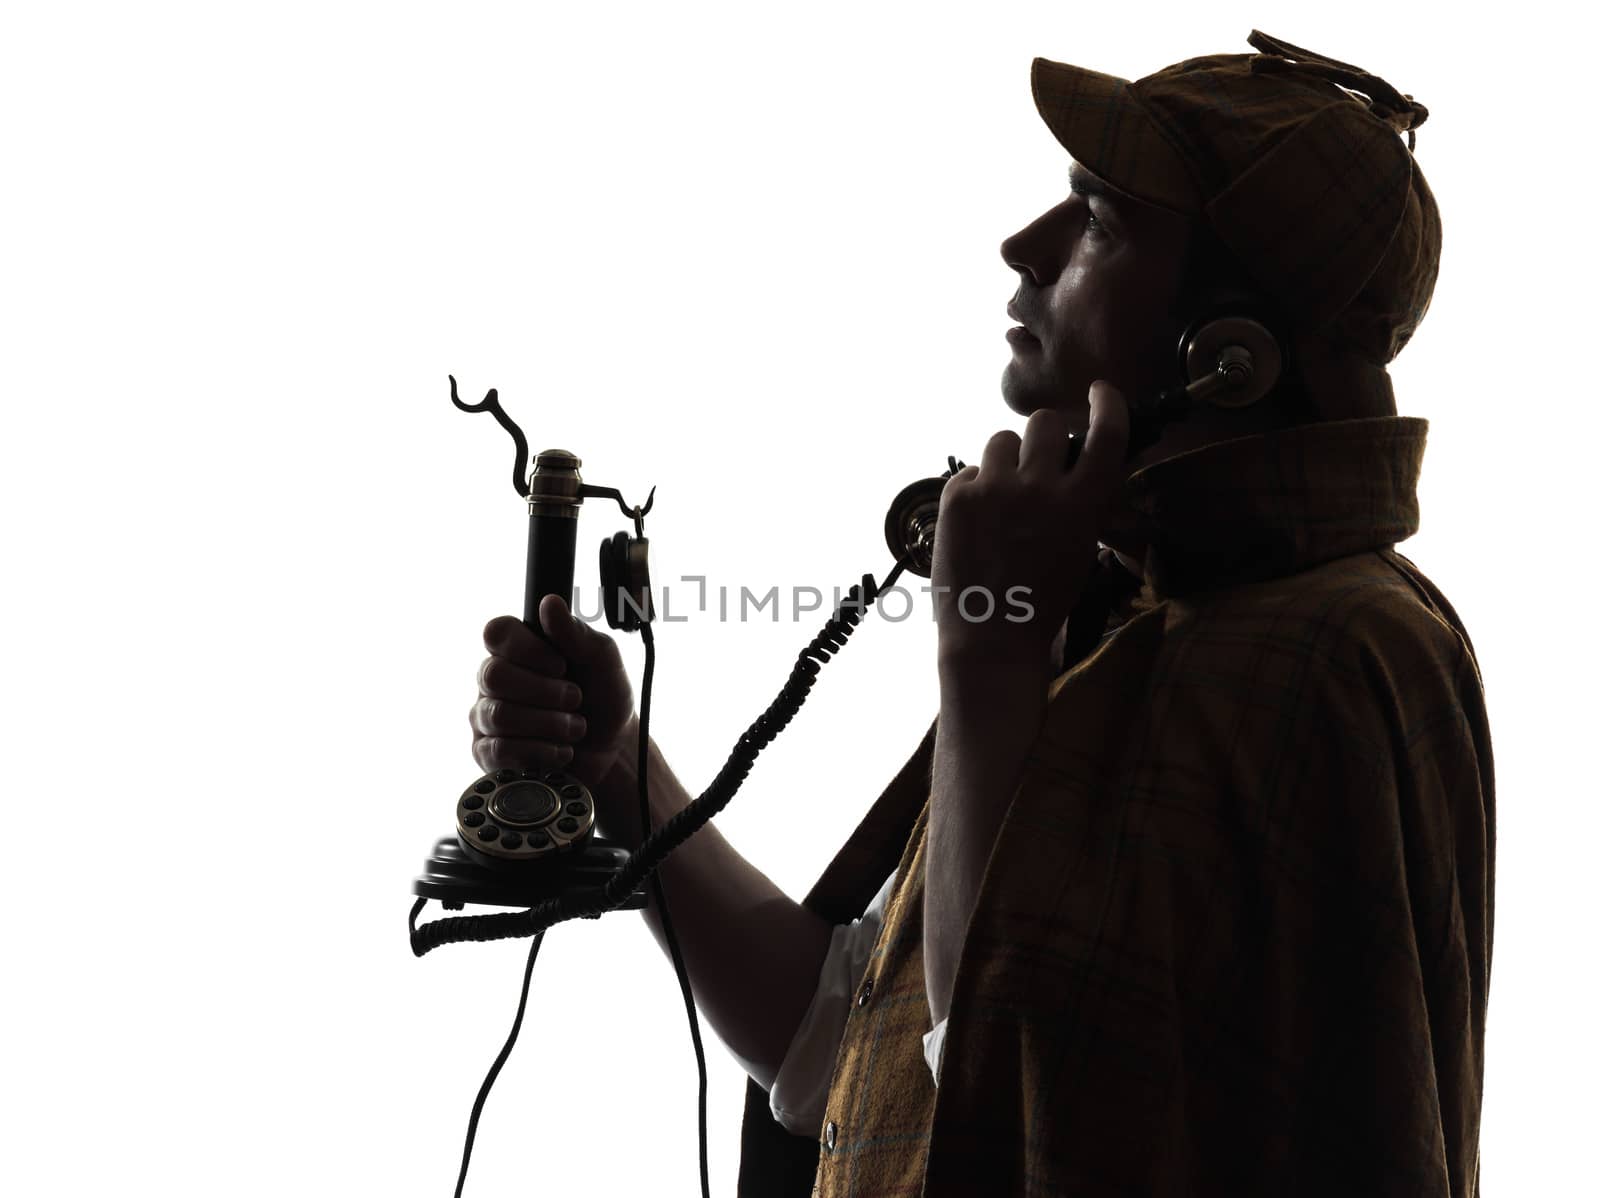 sherlock holmes silhouette on the phone in studio on white background